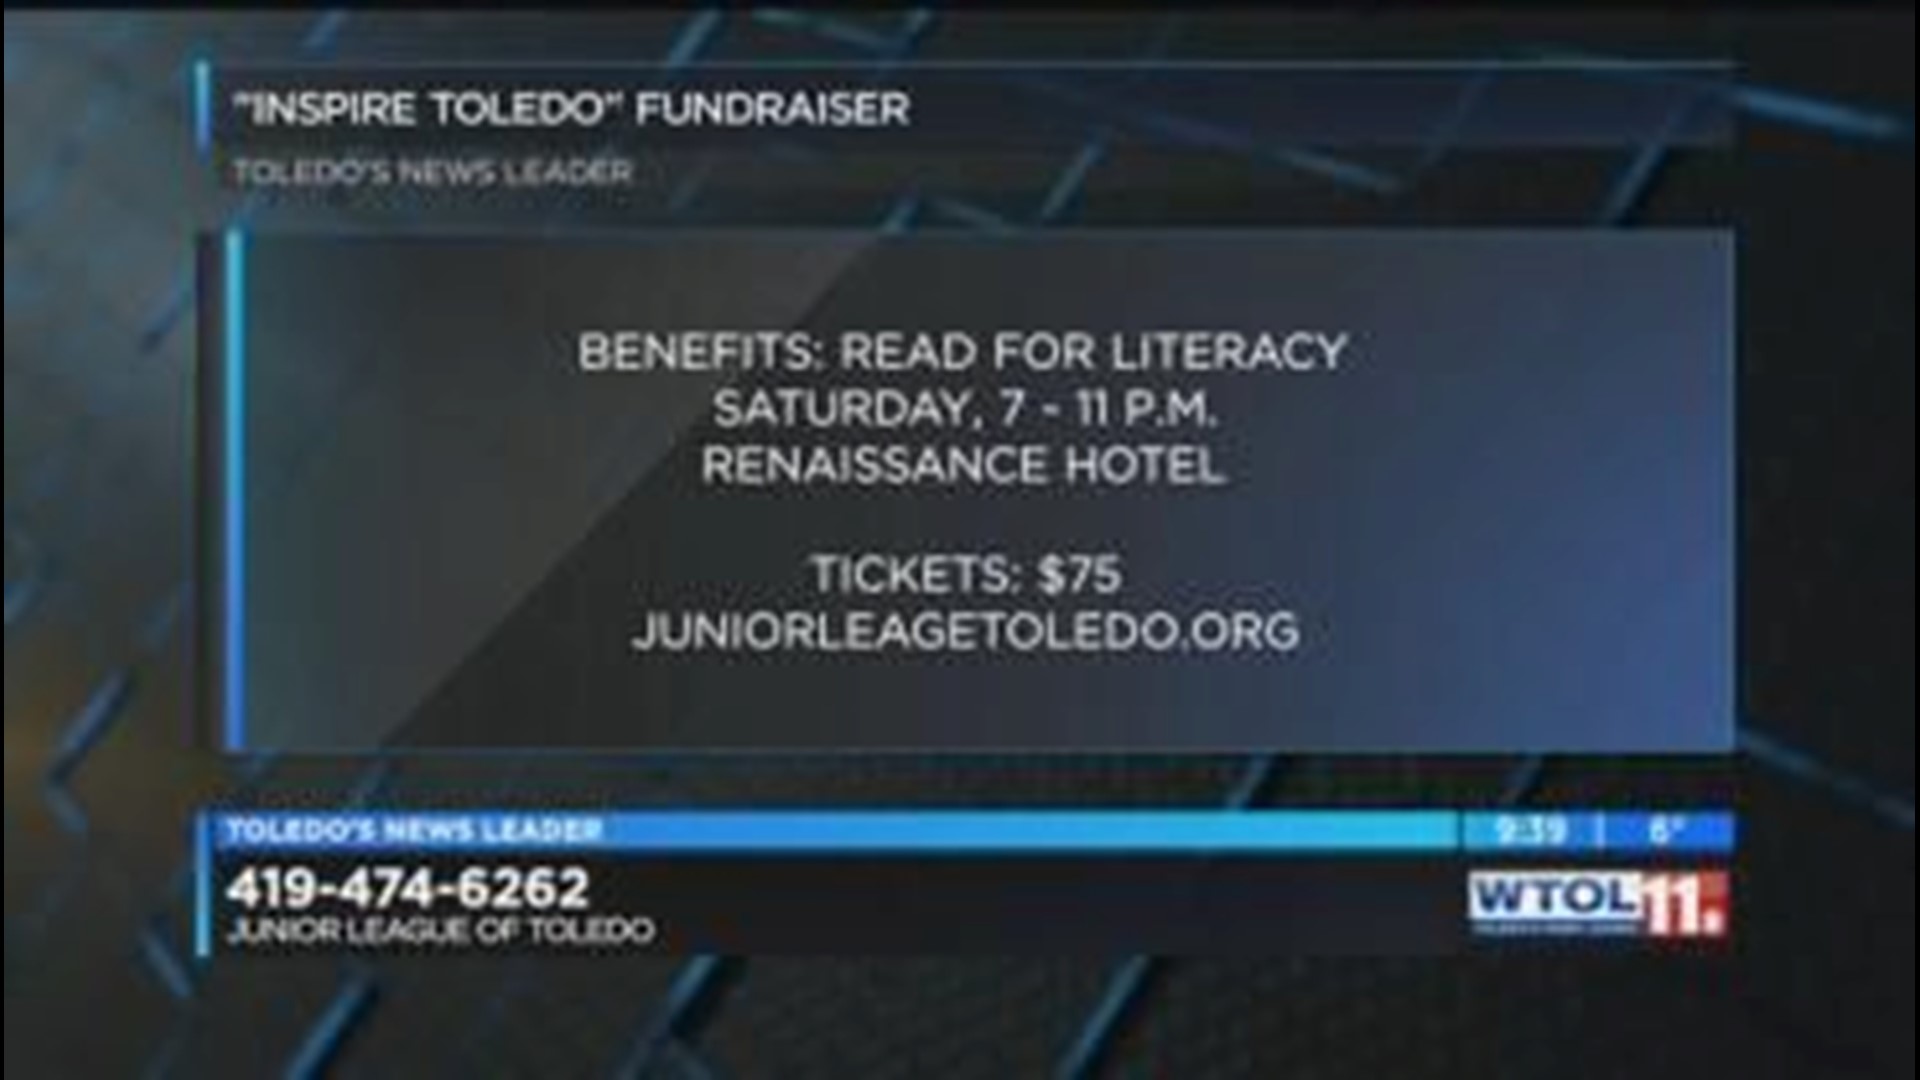 Jr. League hosts event to benefit literacy in NW Ohio